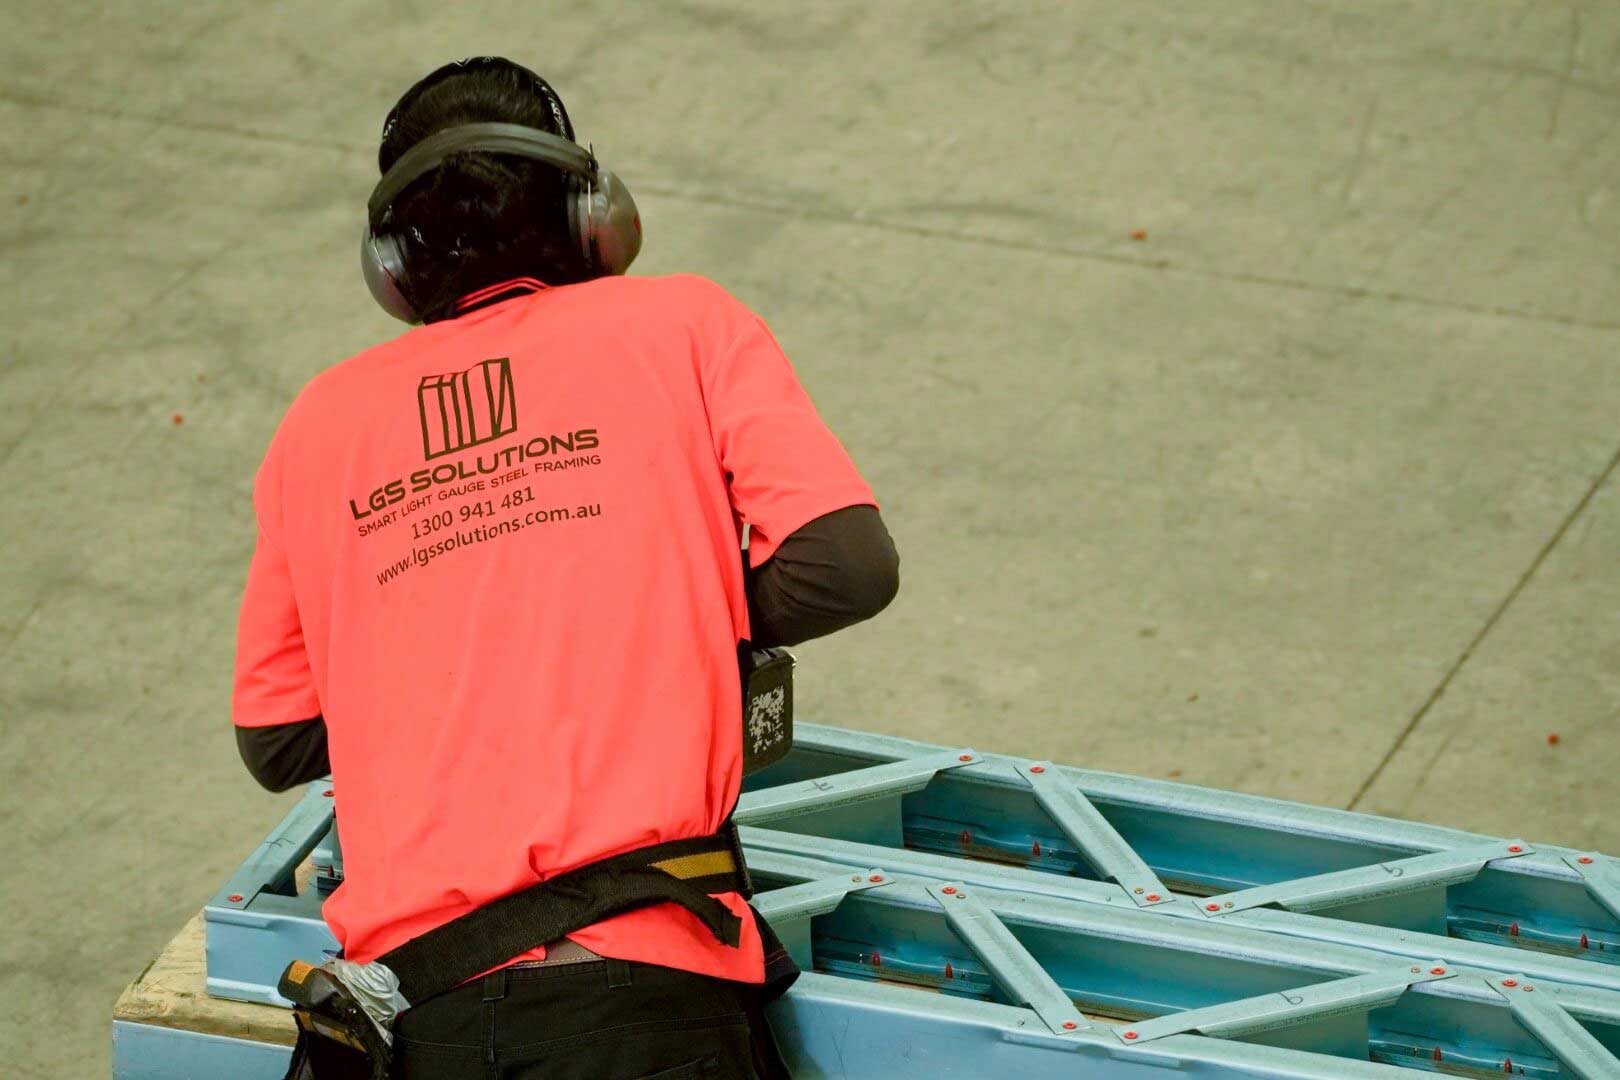 construction worker wearing orange t-shirt and a headset